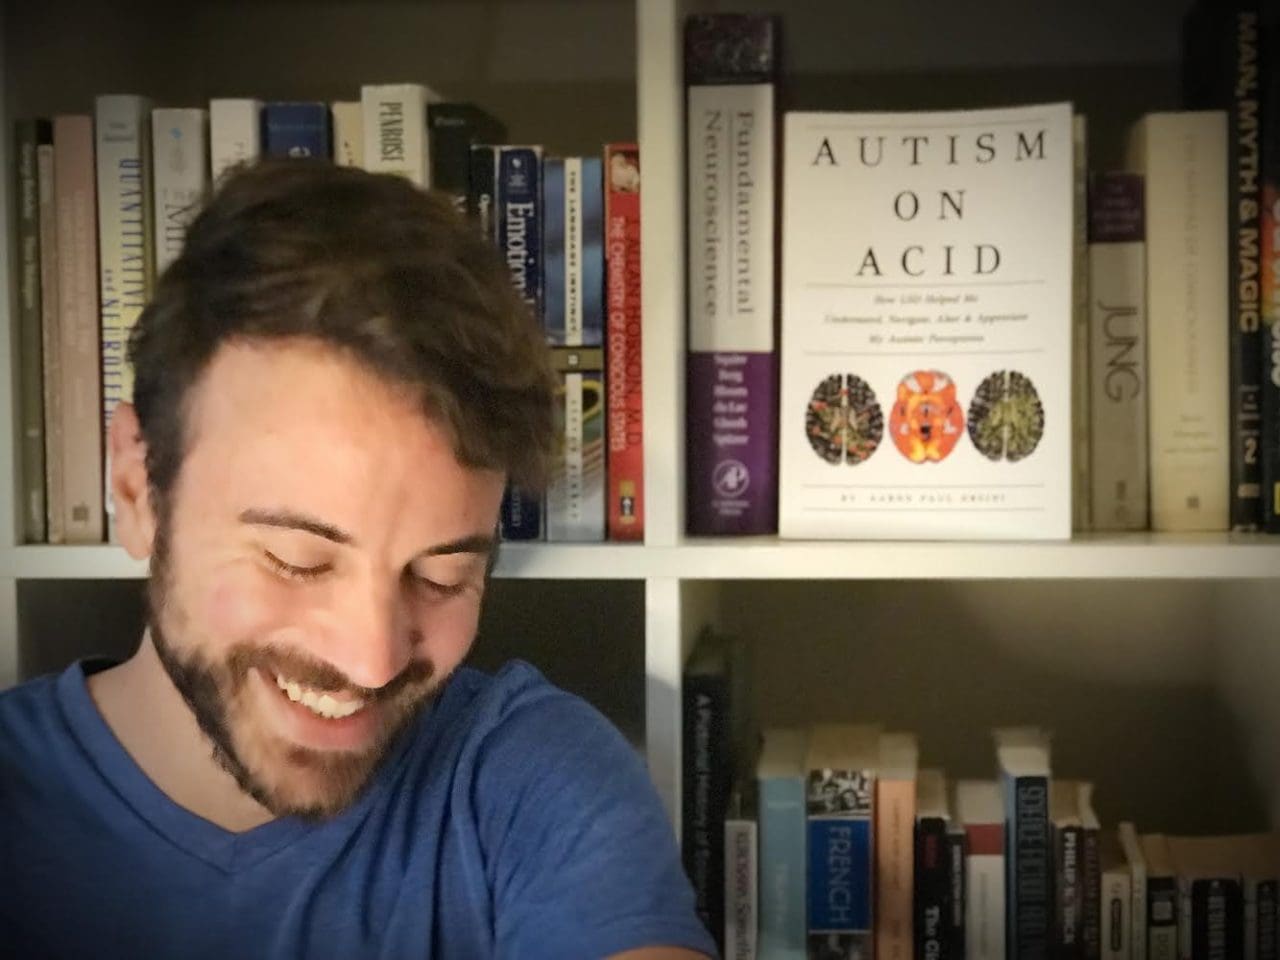 Aaron, a man with brown hair and a beard looks down, smiling, next to a book shelf with his book Autism on Acid displayed